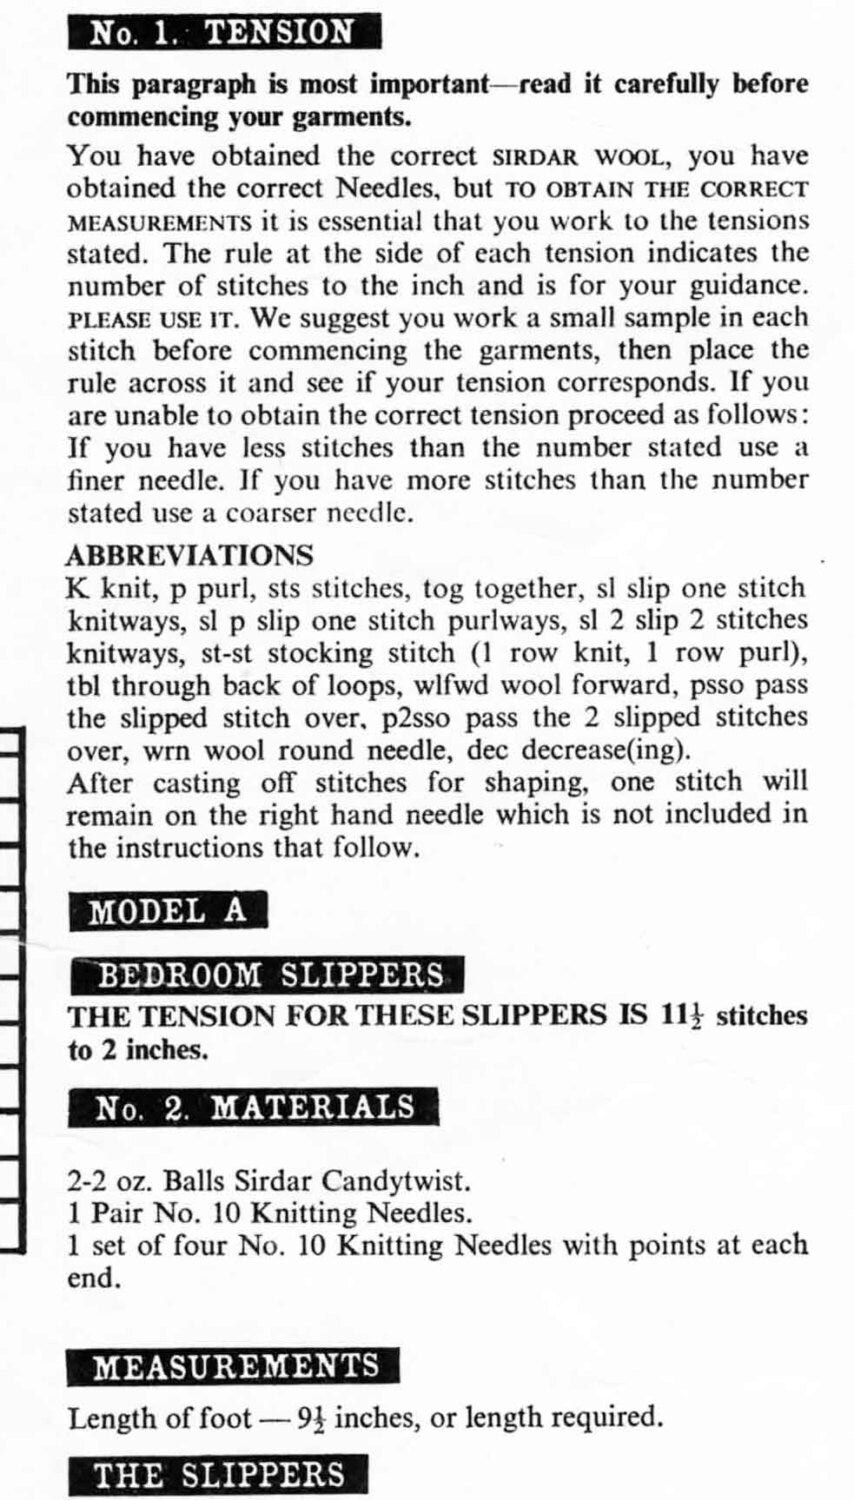 Bedroom Slippers and Bedsocks, 4ply & DK, 60s Knitting Pattern, Sirdar 2233